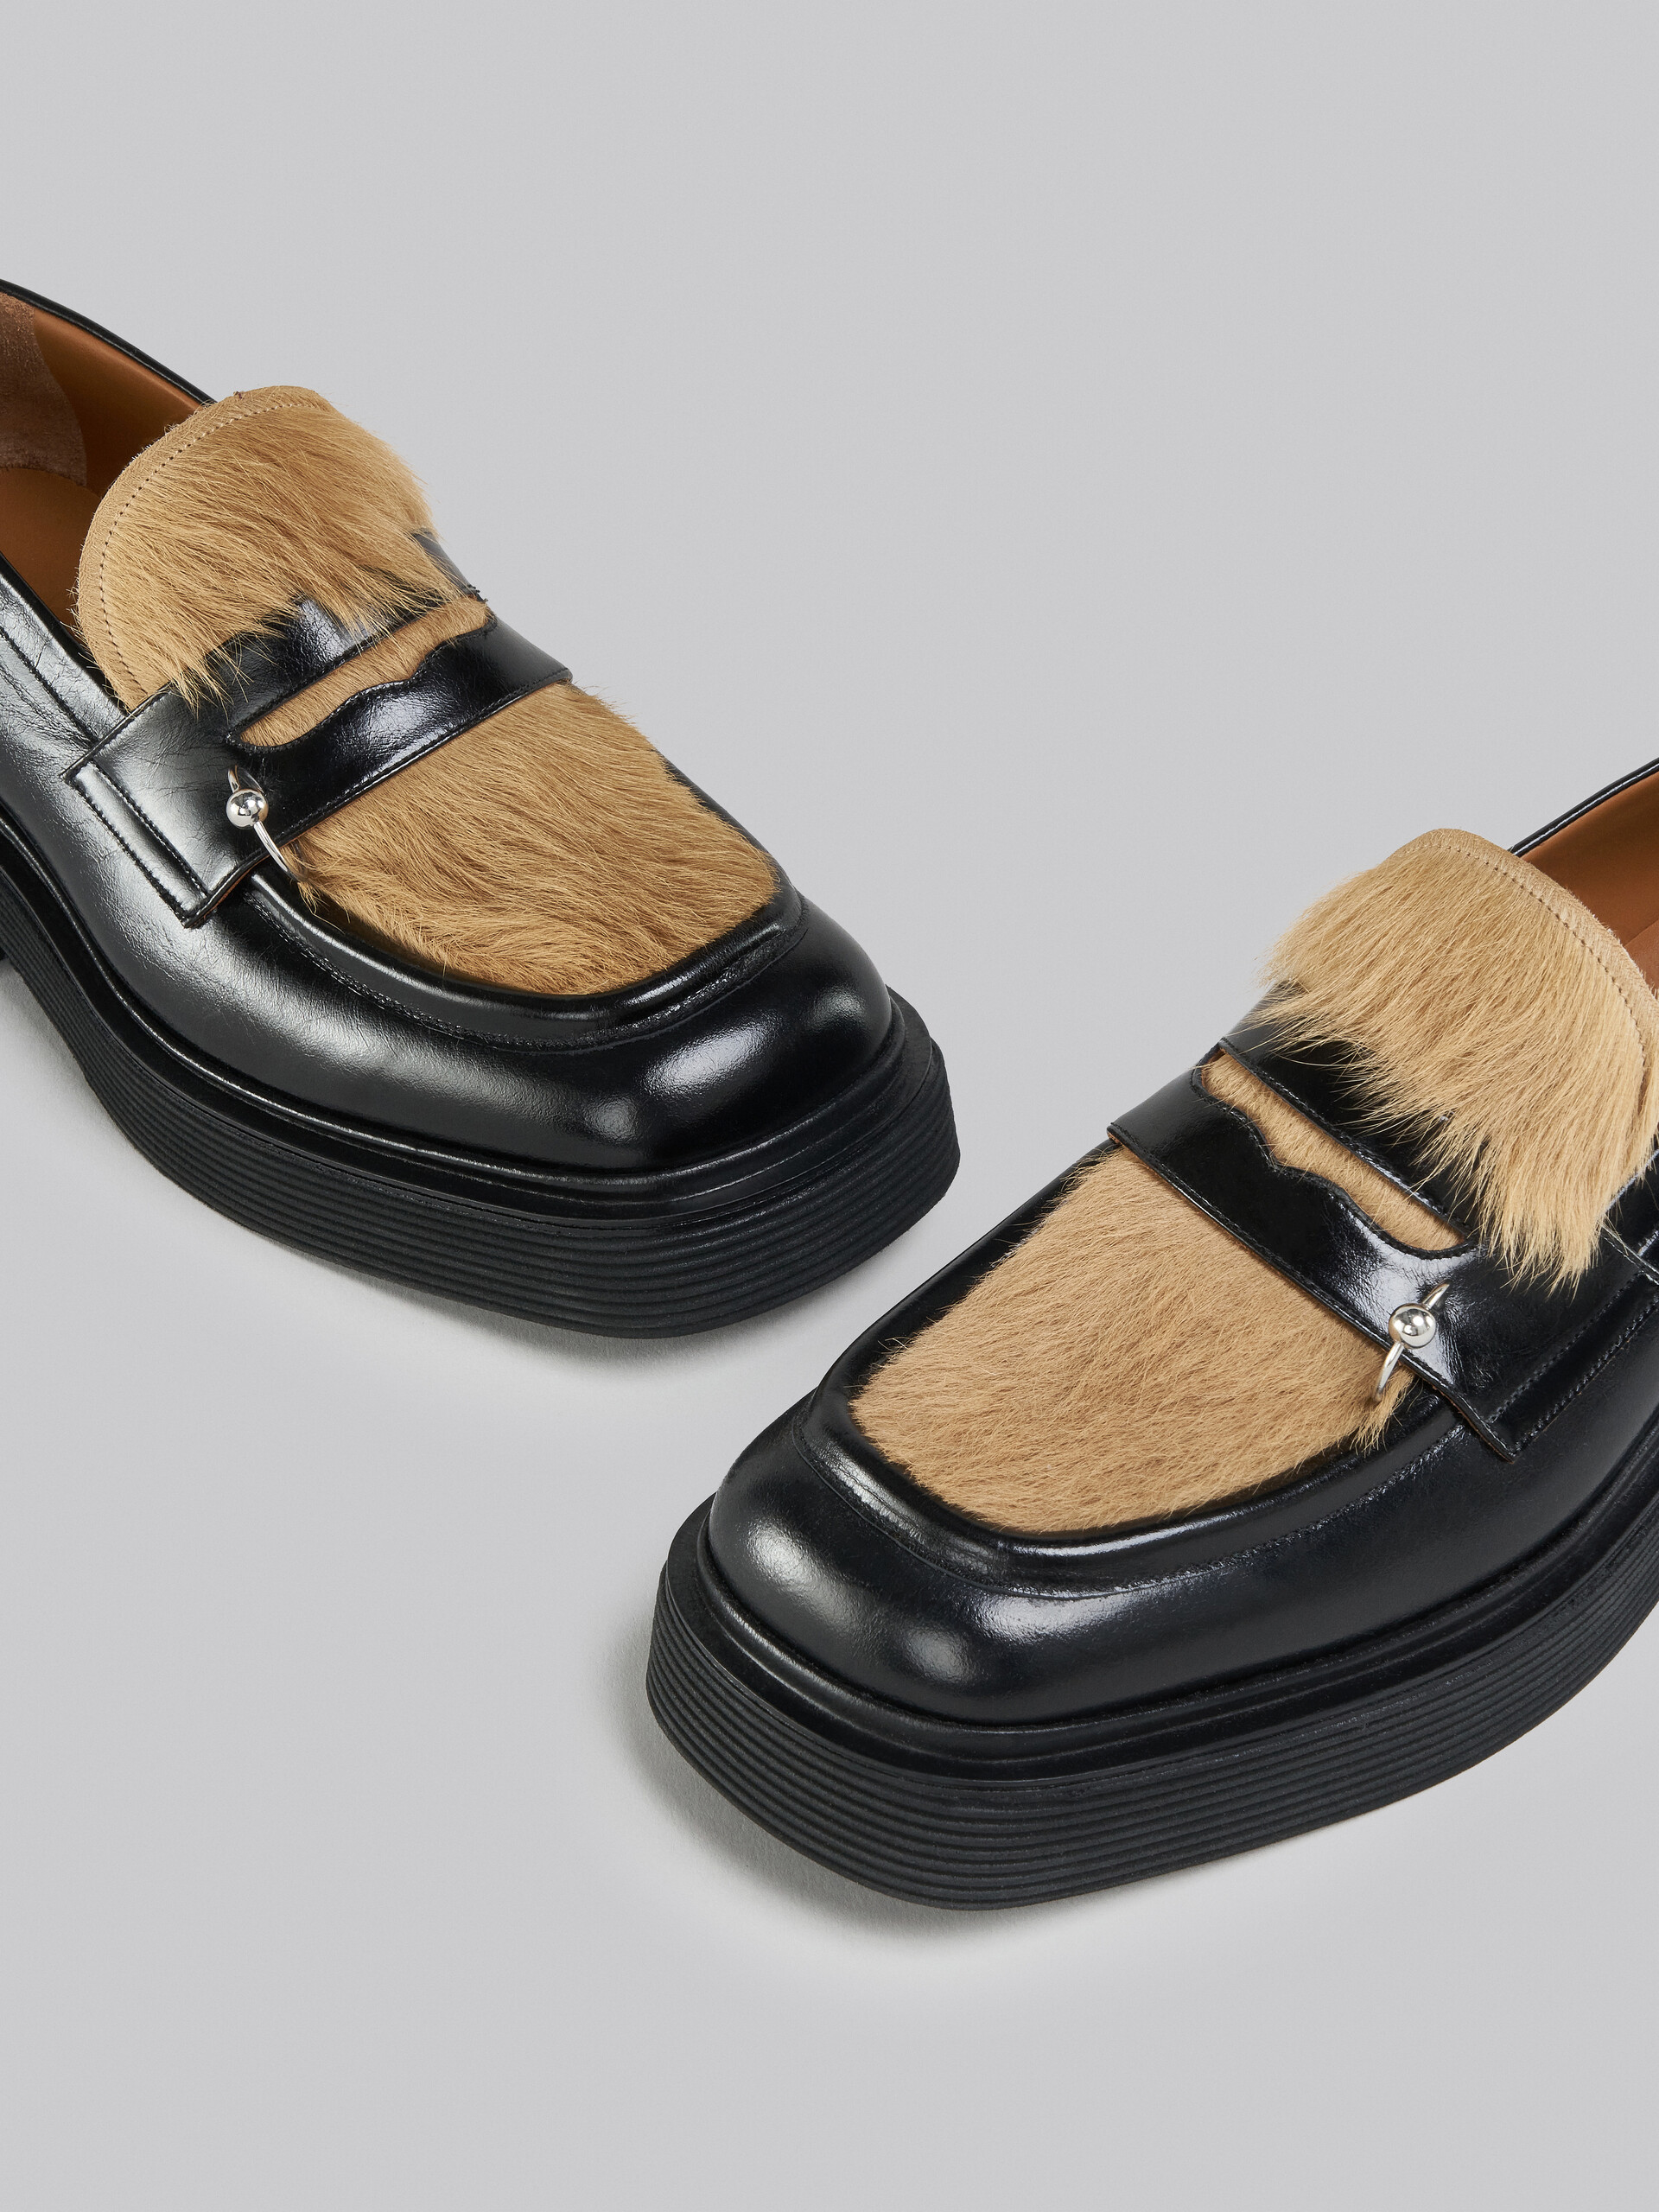 Black leather and beige long hair calfskin moccasin - Mocassin - Image 5